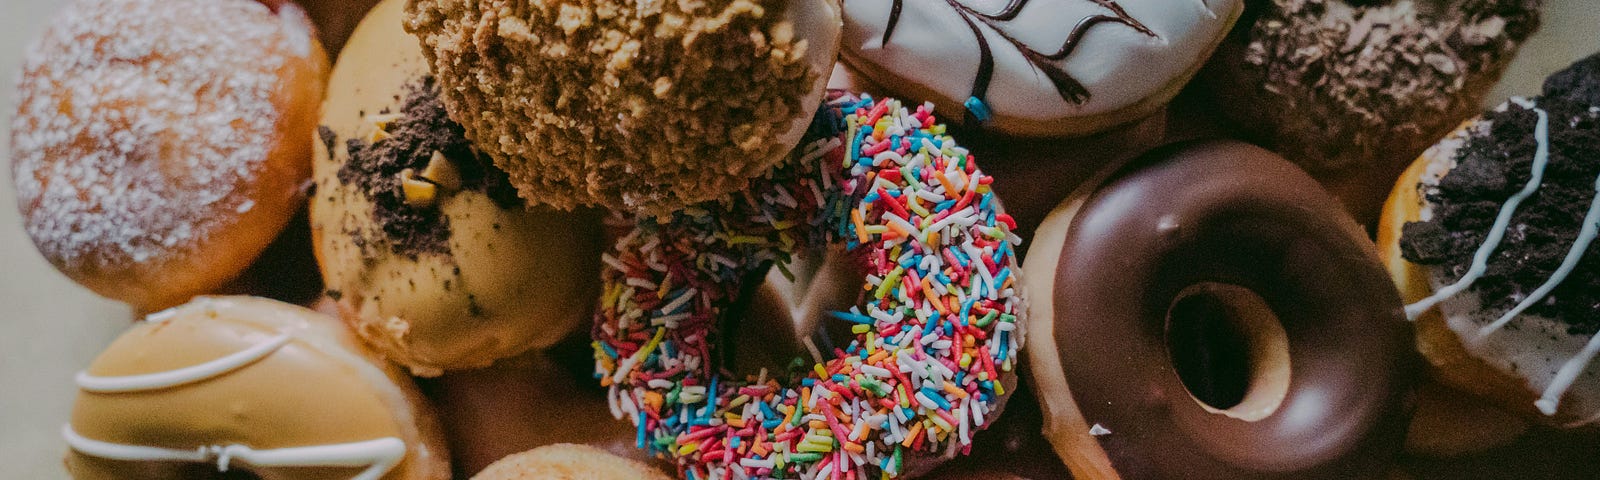 Close up of assortment of colorfully designed donuts